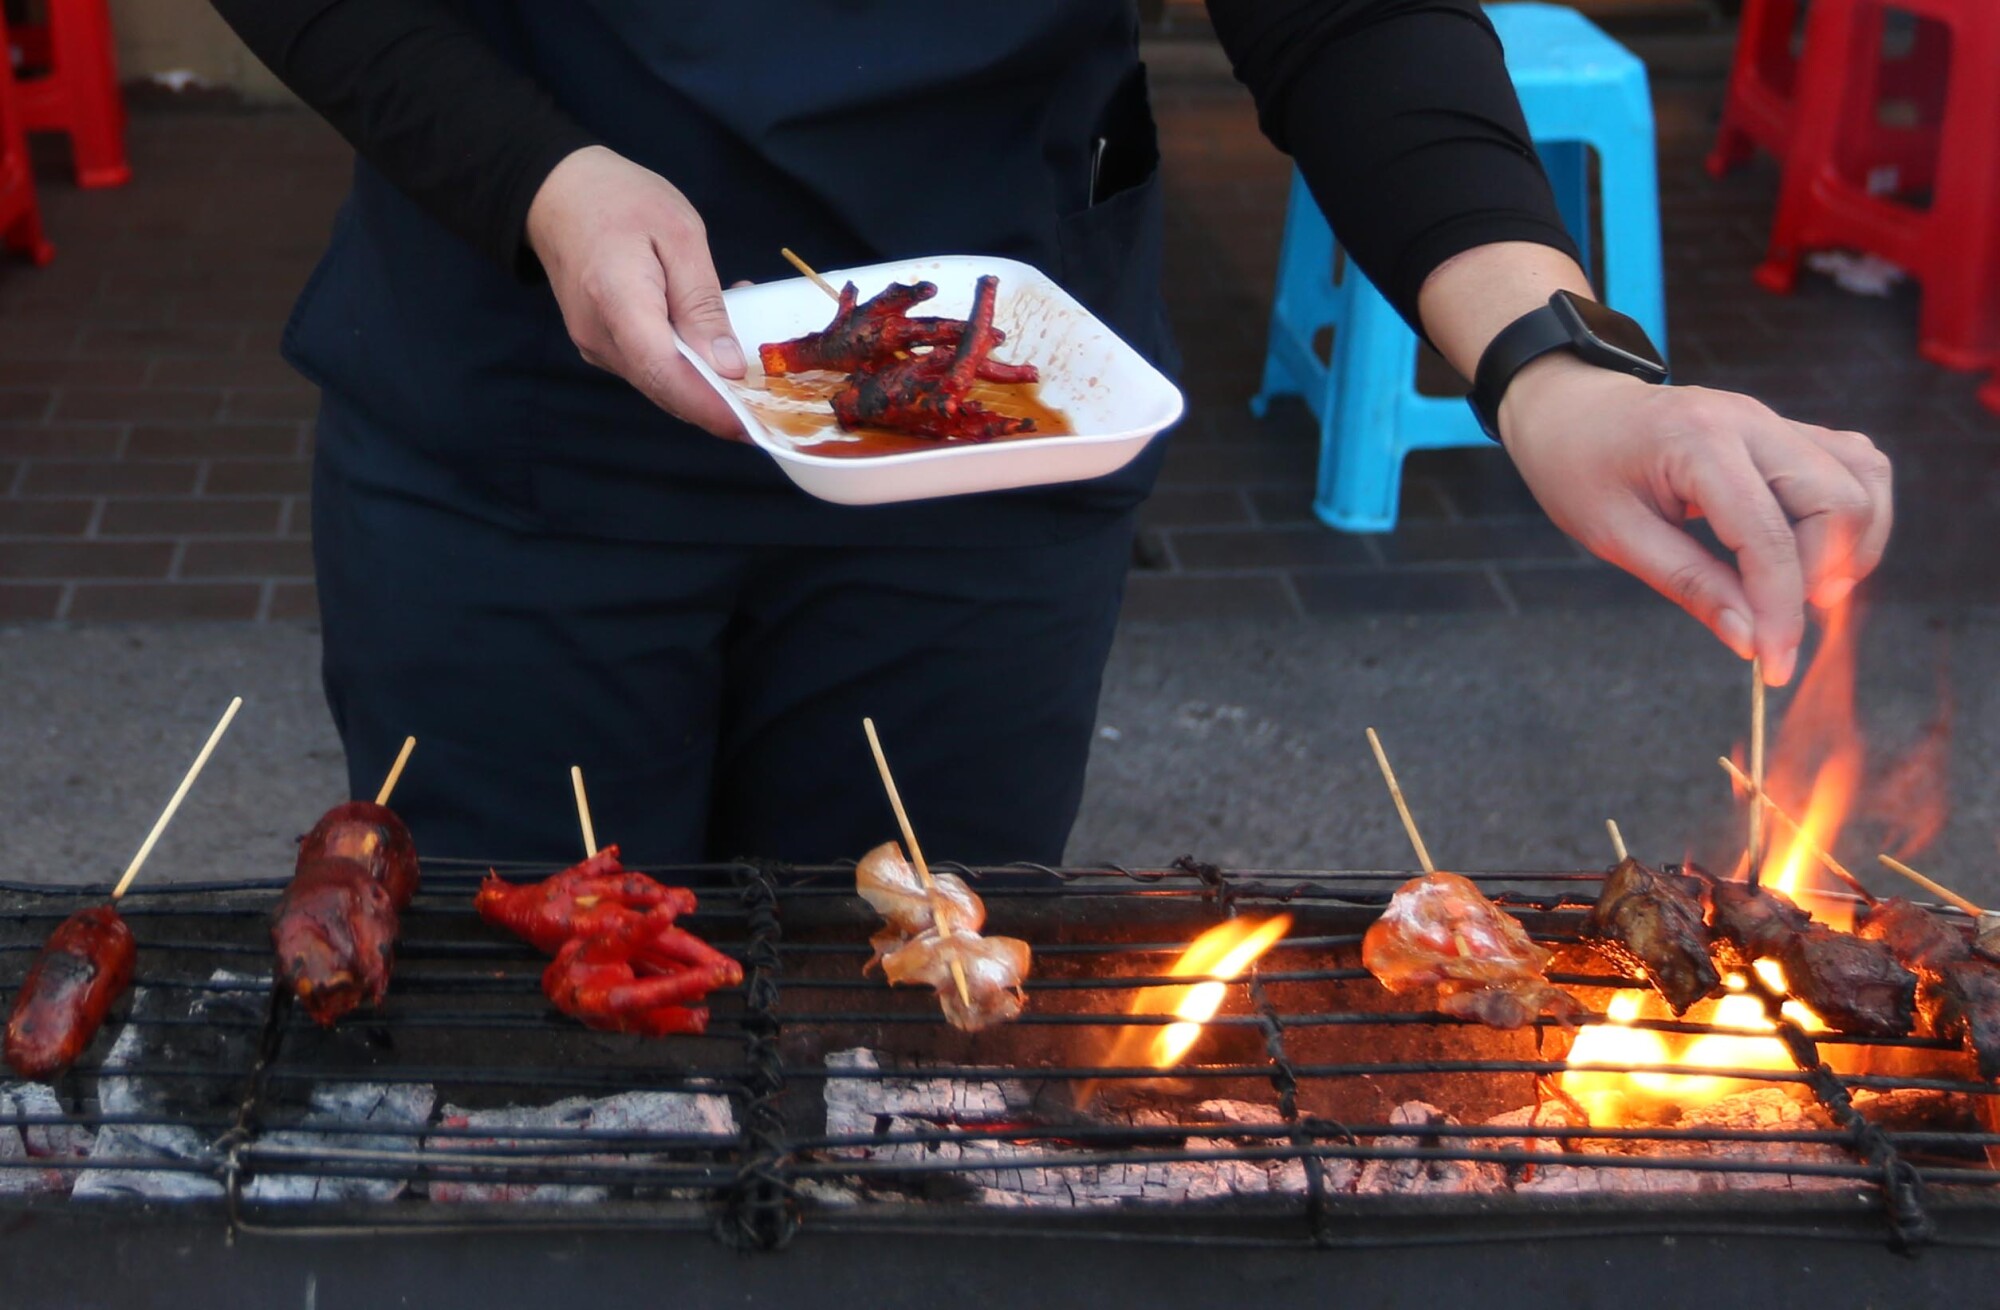 Meat skewers are grilled at a restaurant in Historic Filipinotown.